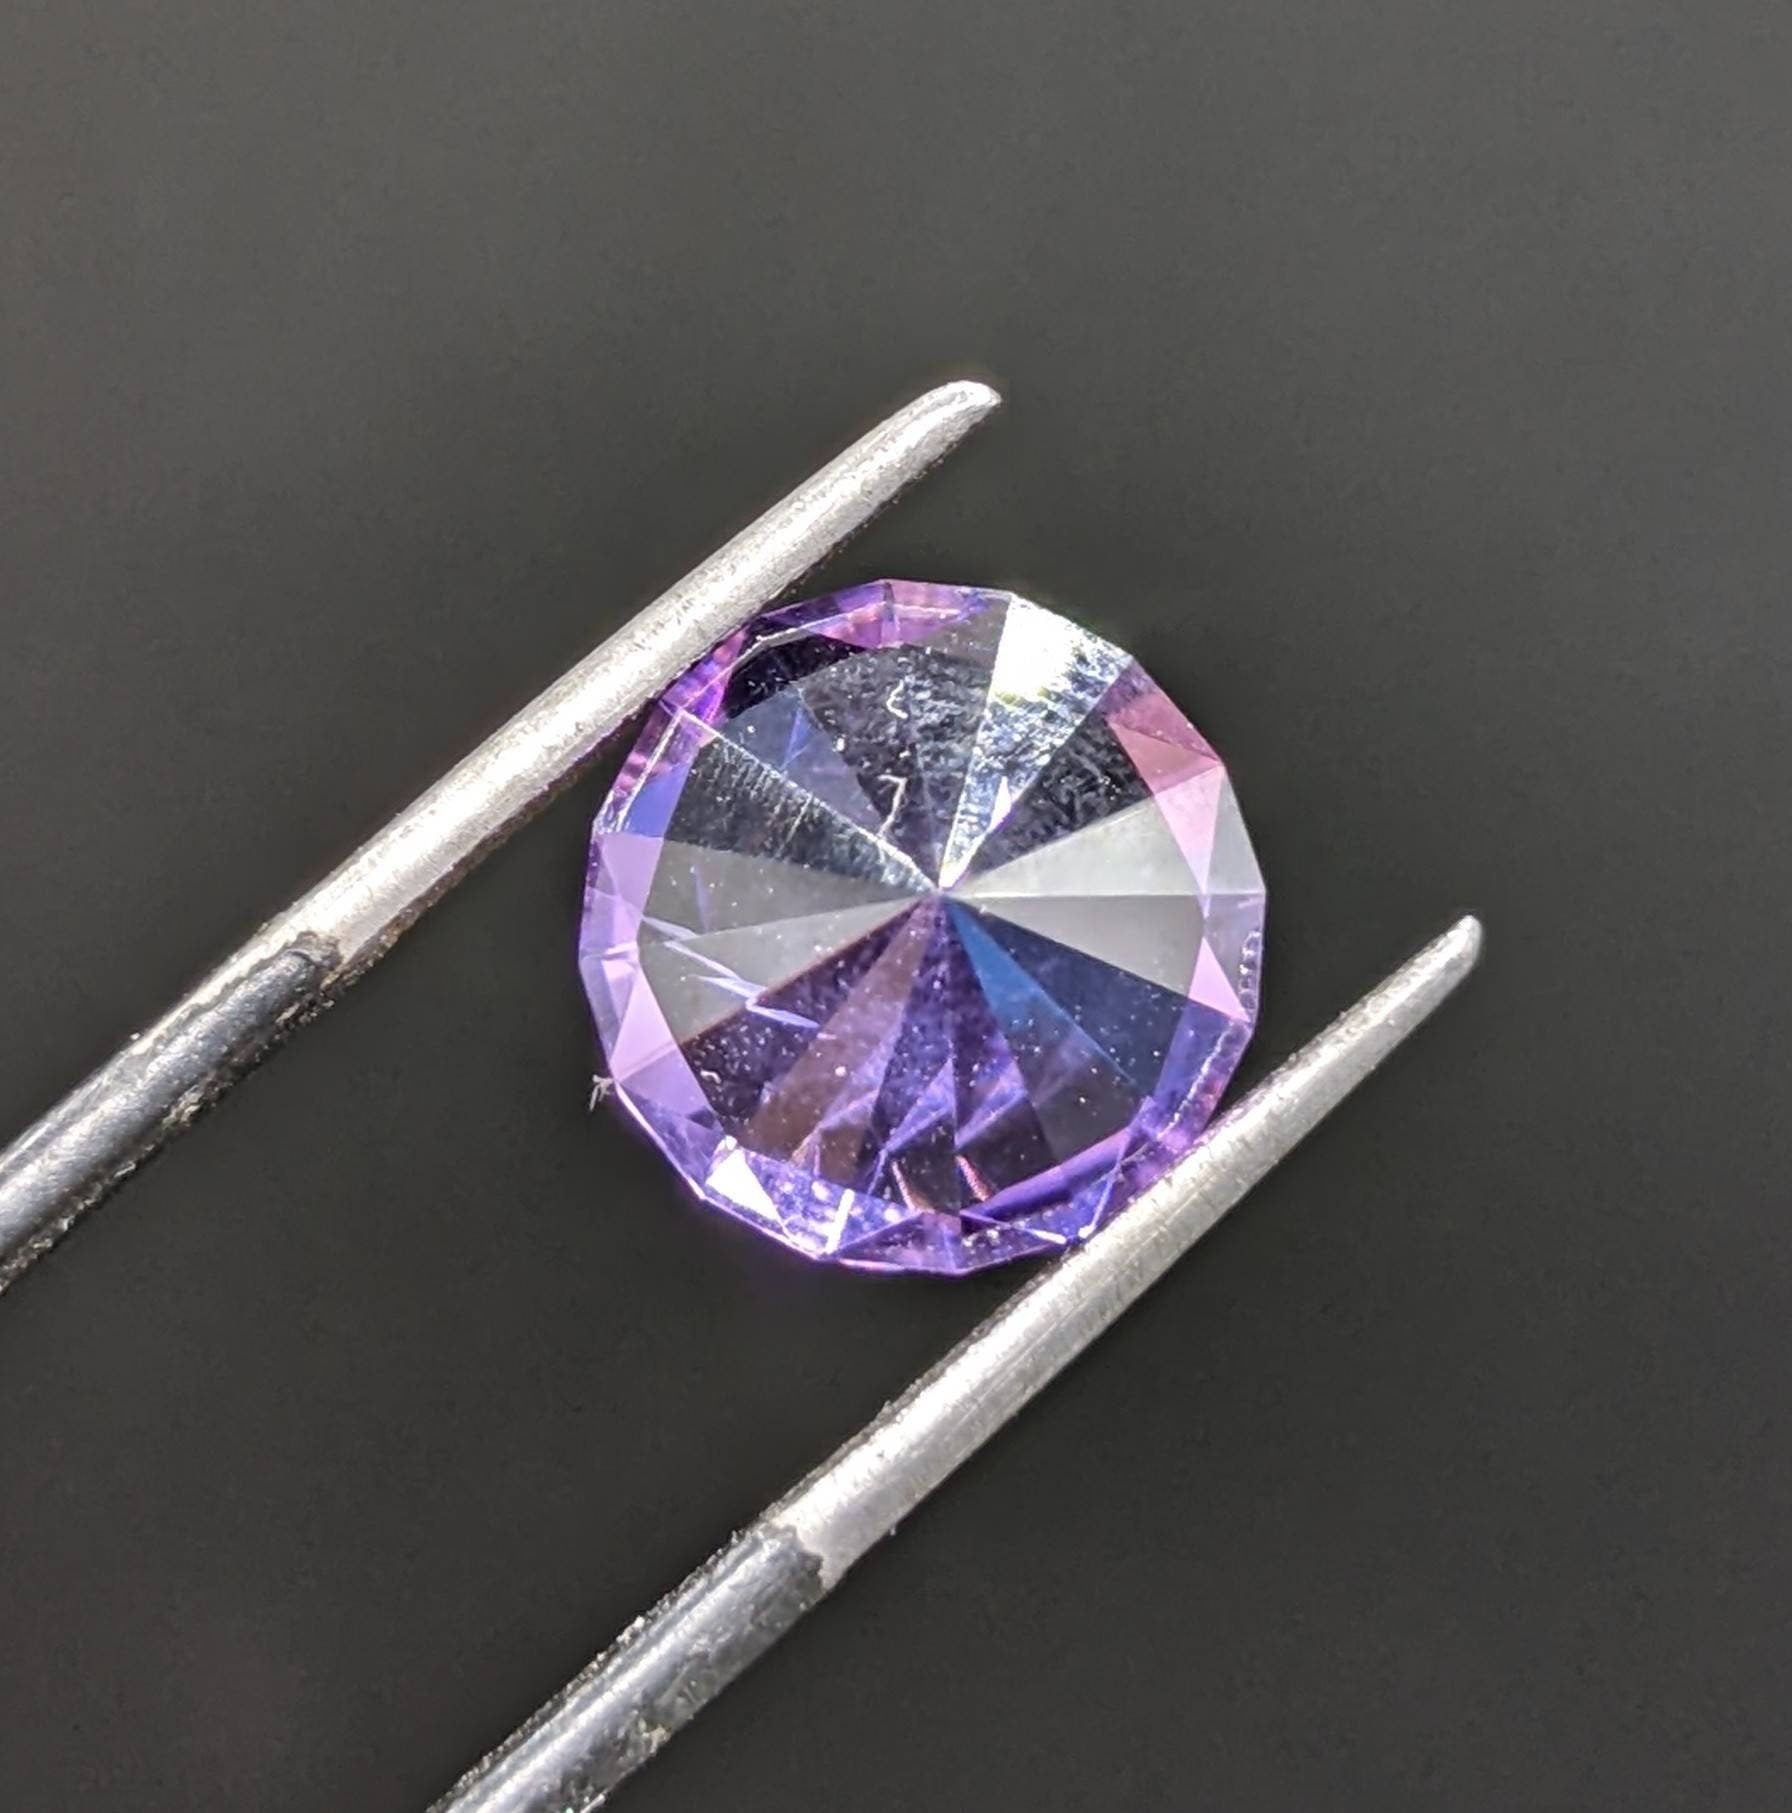 ARSAA GEMS AND MINERALSNatural deep purple color eye clean clarity round cut shape faceted amethyst gem, 4.5 carats - Premium  from ARSAA GEMS AND MINERALS - Just $10.00! Shop now at ARSAA GEMS AND MINERALS